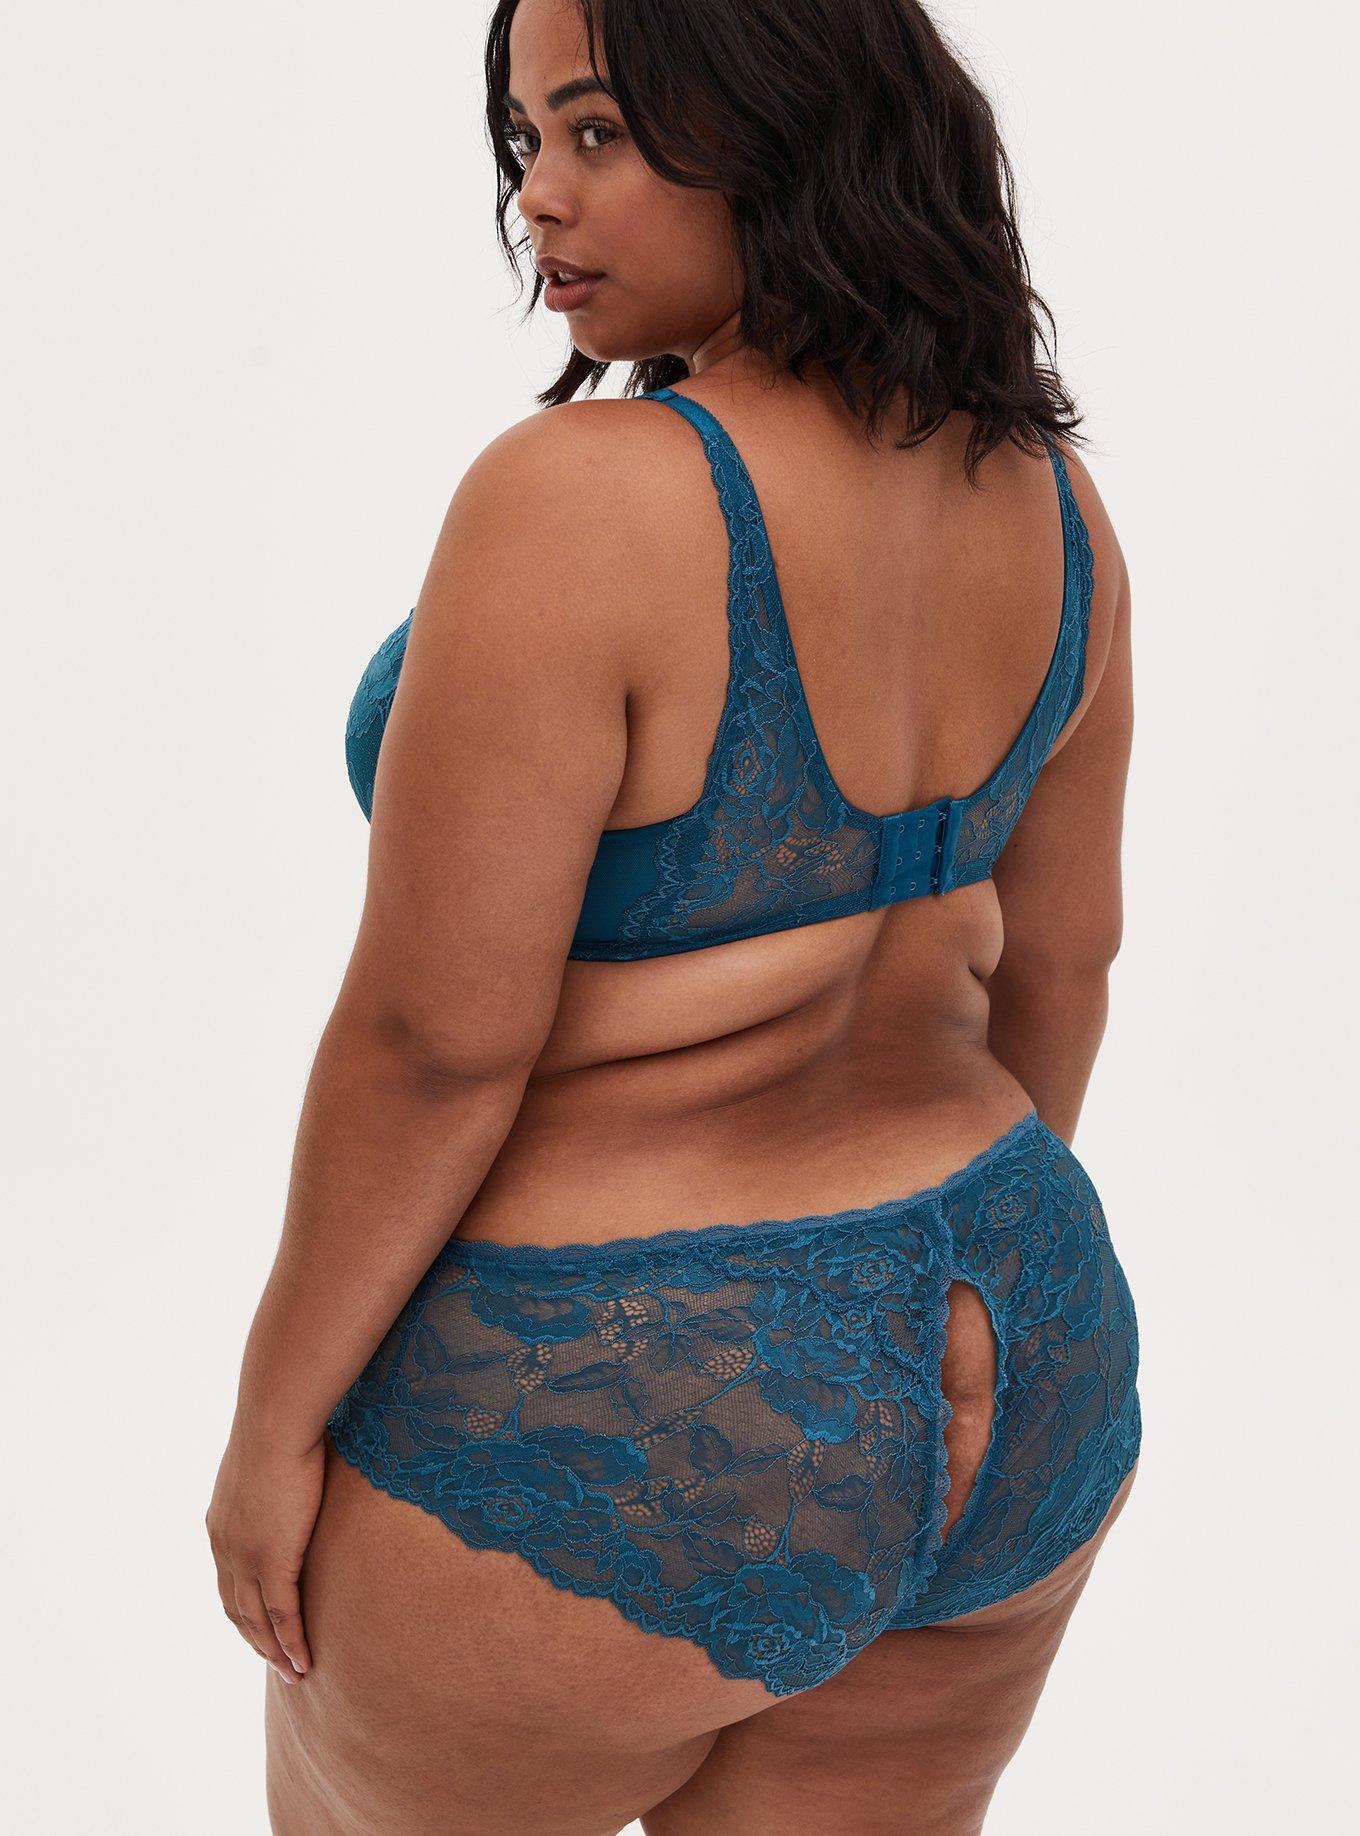 Torrid Red Lace With Sexy Open Back Slit Cheeky Panty Plus Size 4X, 26